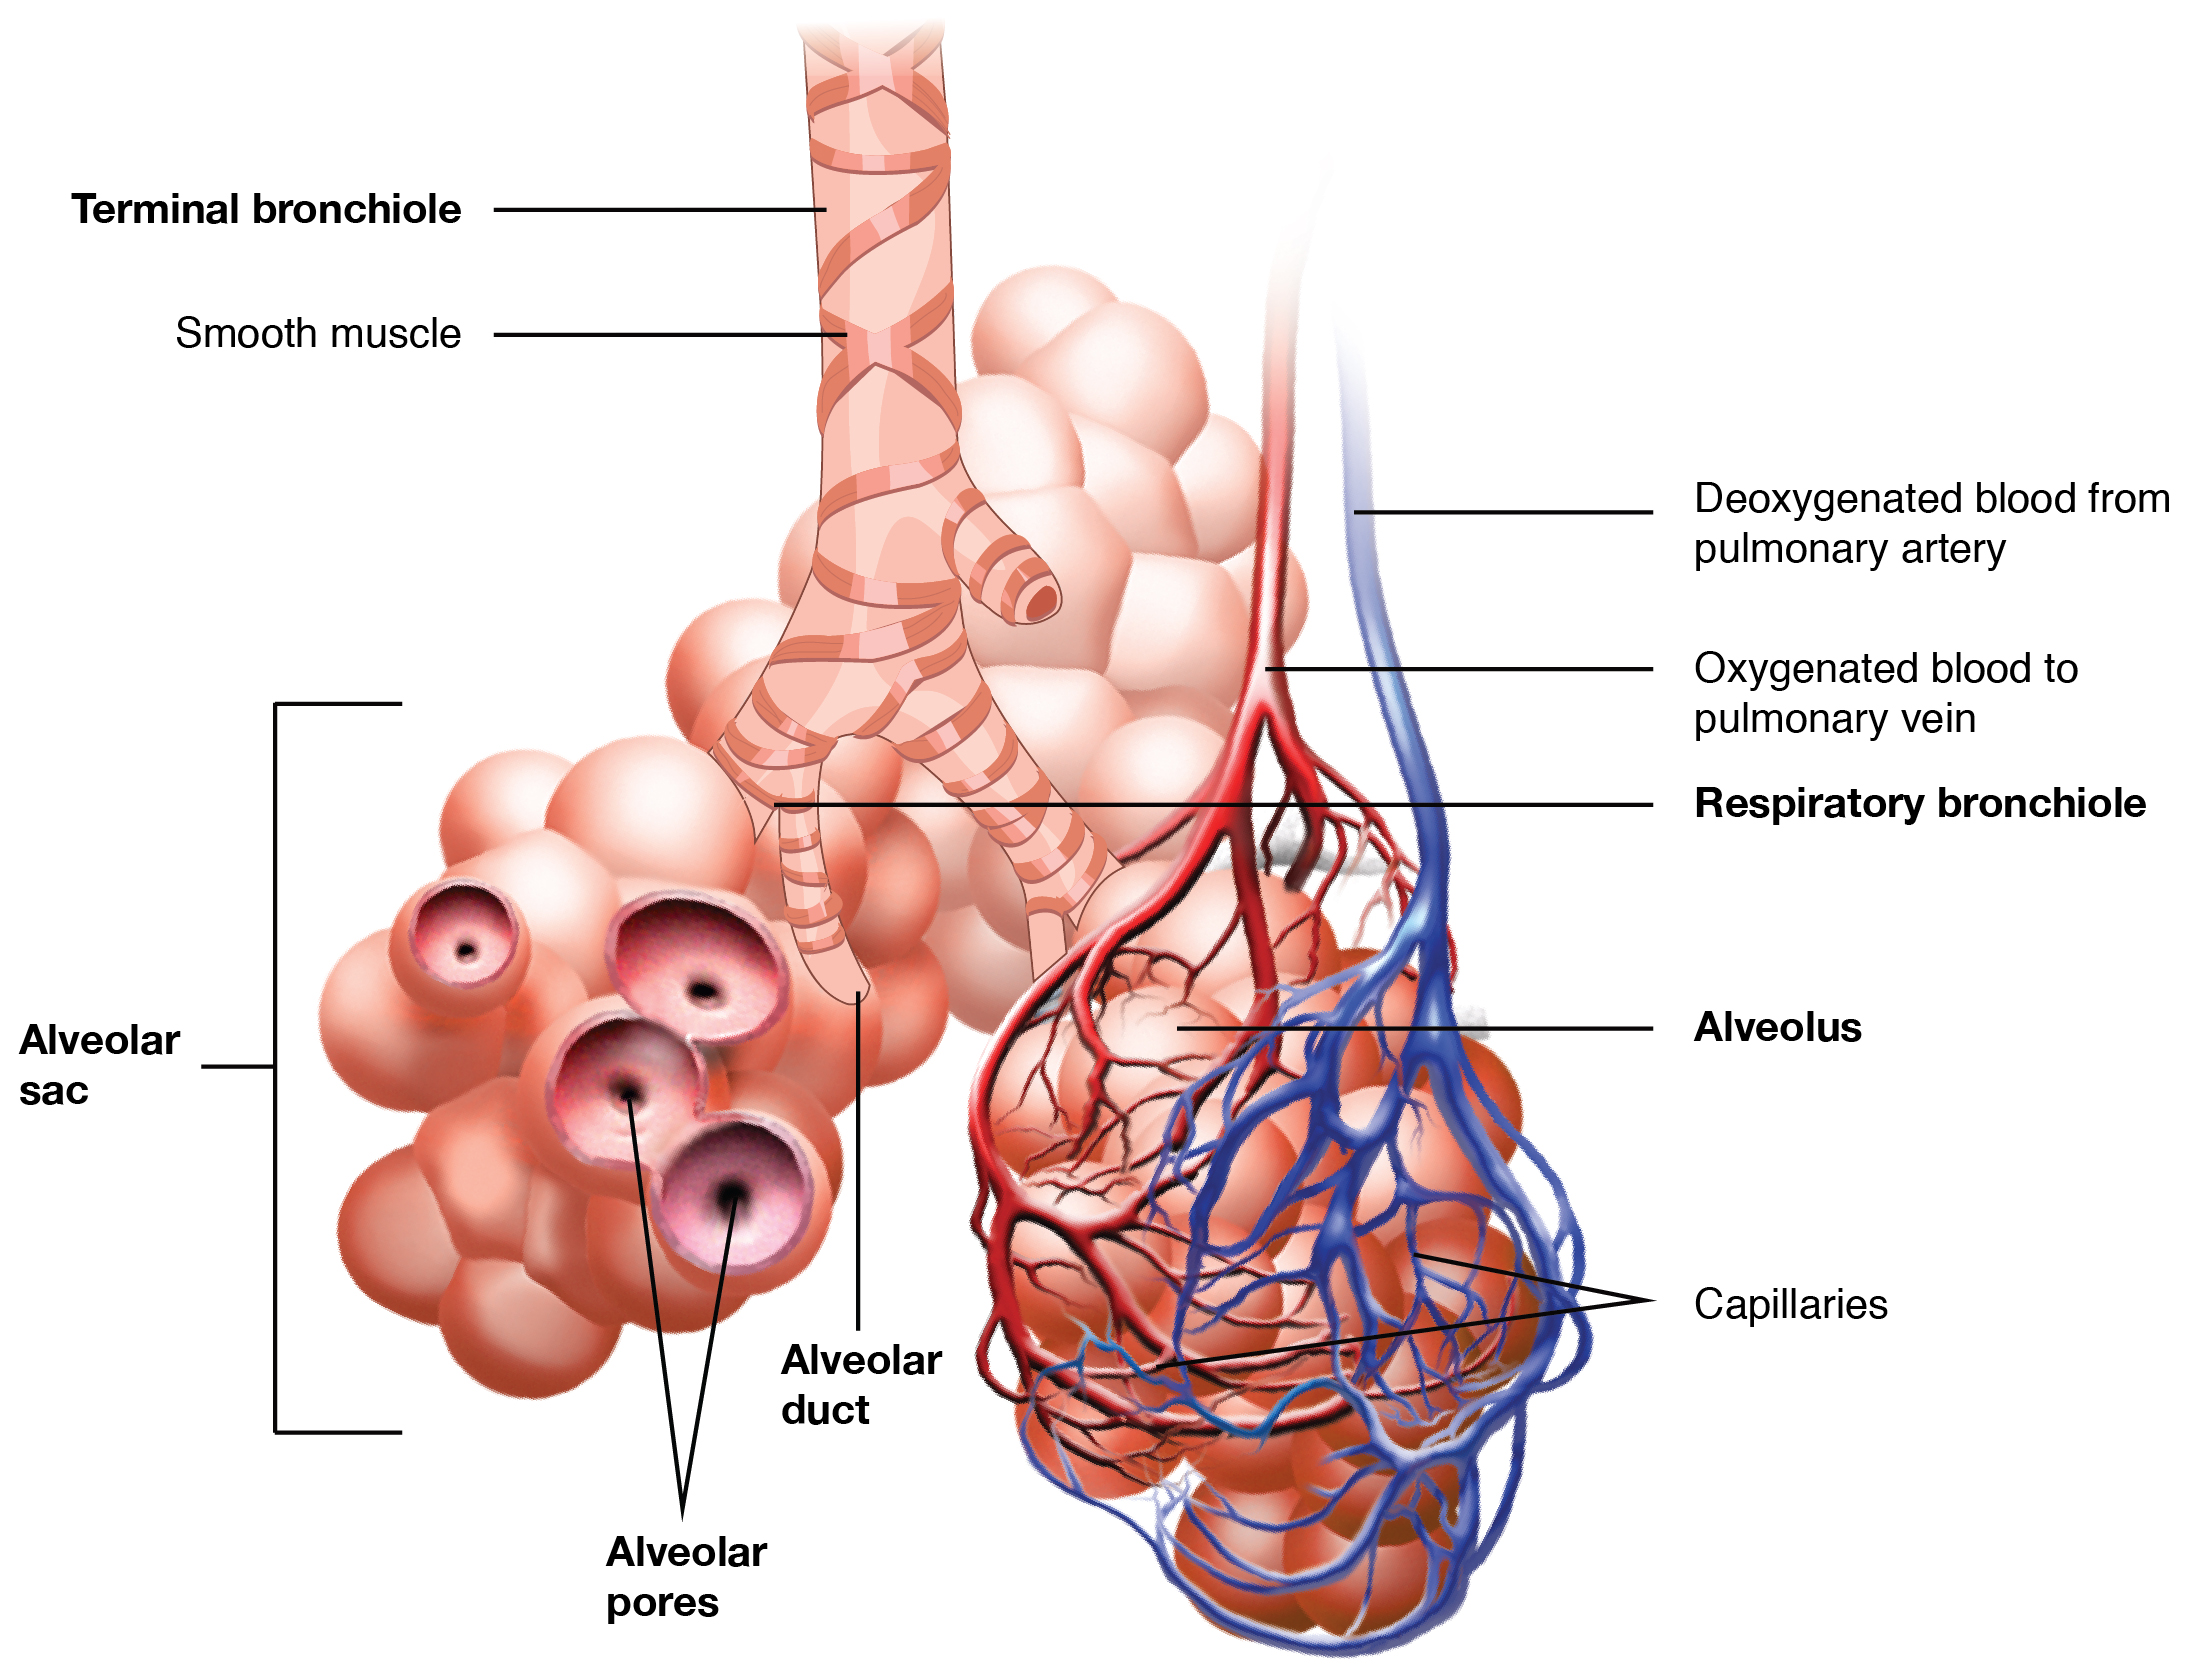 This image shows the bronchioles and alveolar sacs in the lungs and depicts the exchange of oxygenated and deoxygenated blood in the pulmonary blood vessels.